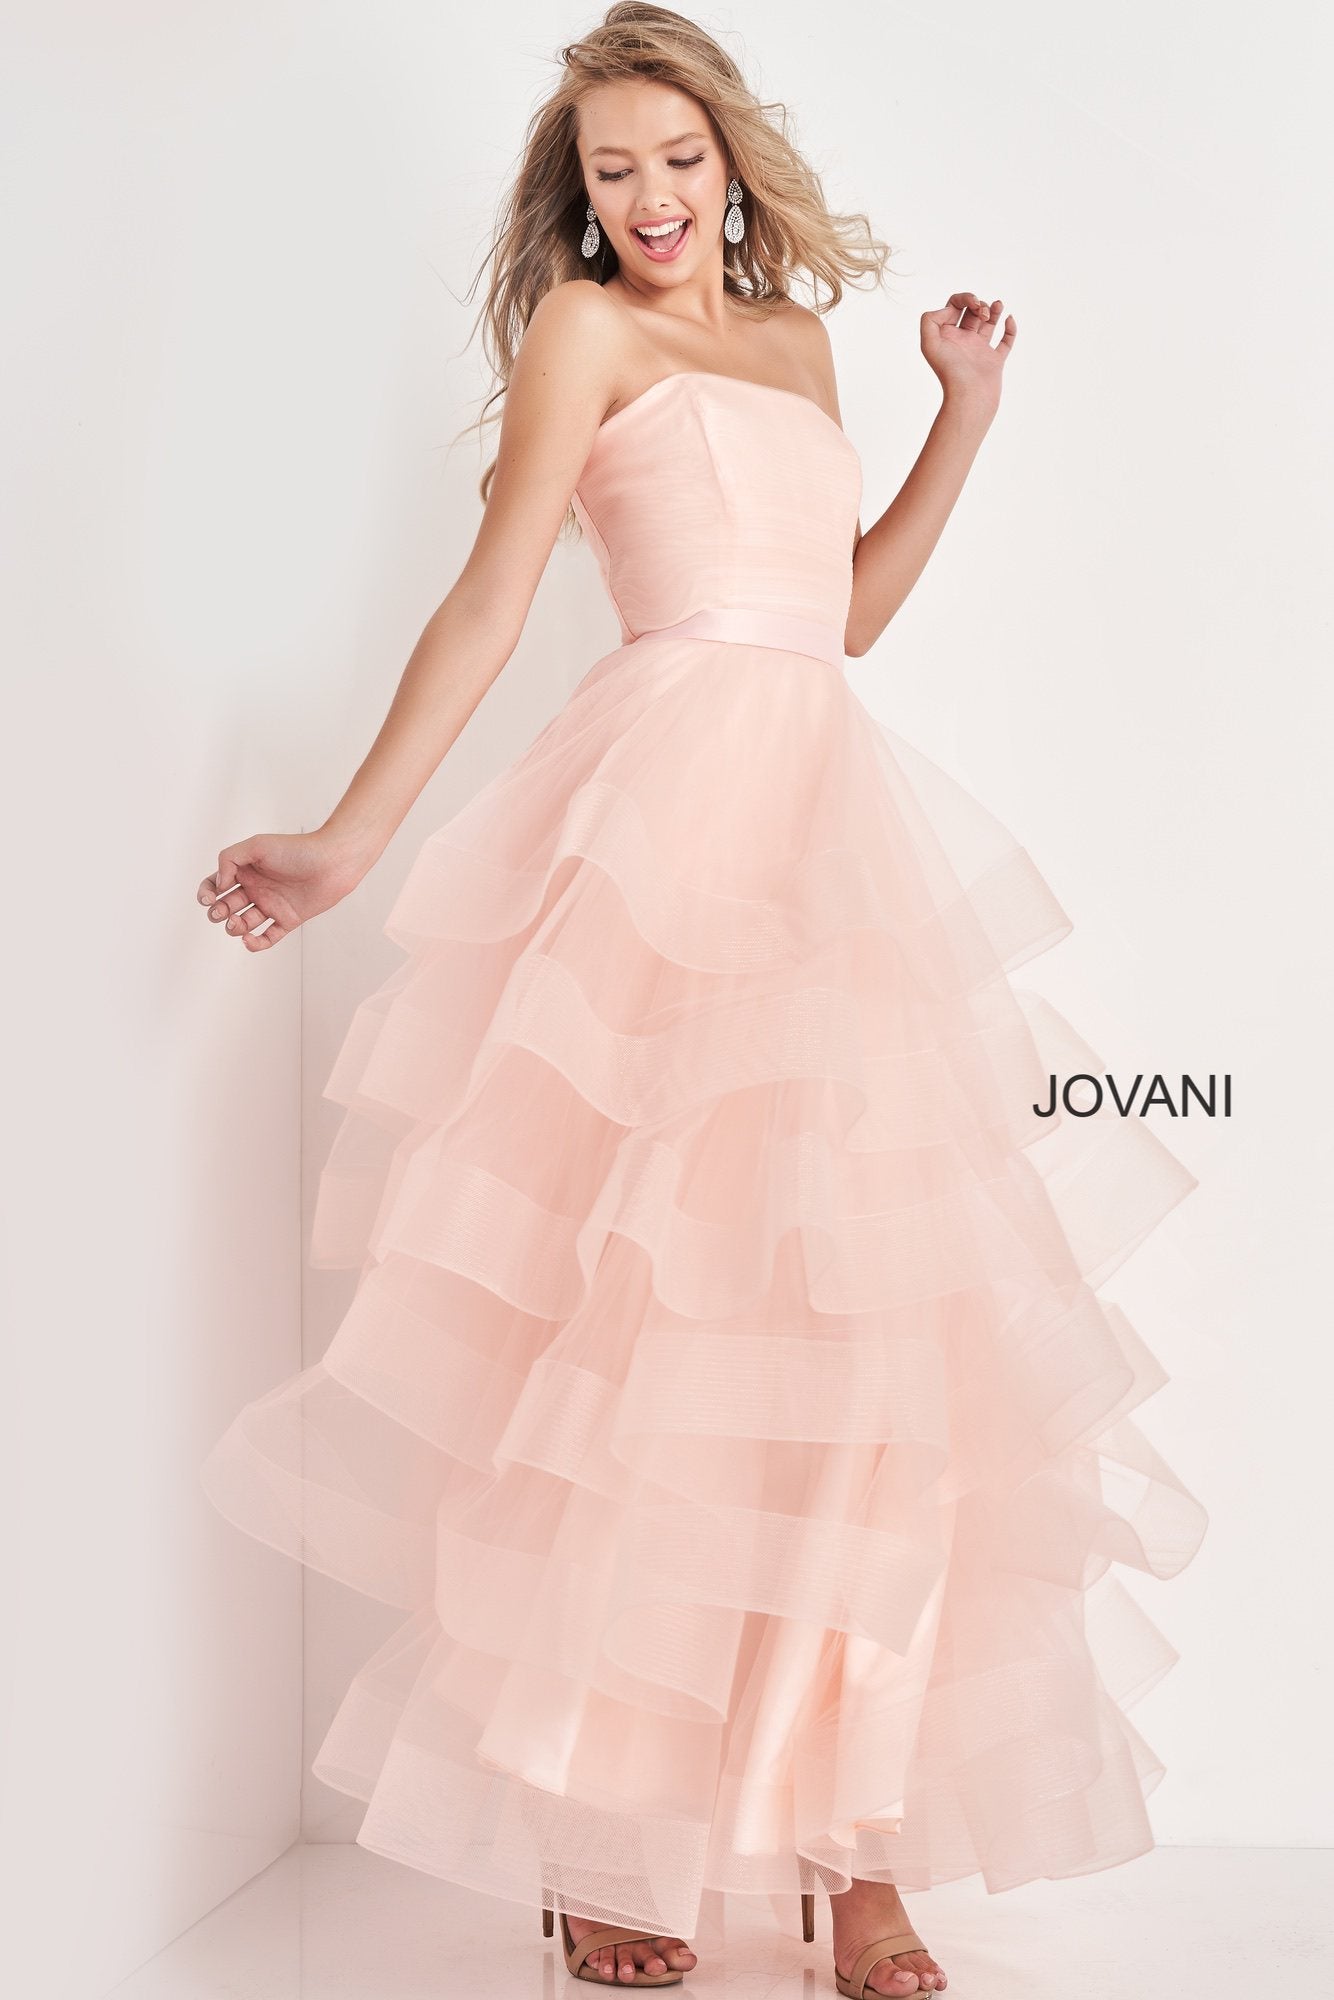 Jovani Kids K02442 is a Girls Prom Dress, Kids Pageant Gown & Pre Teen Formal Evening Wear gown. Girls Long Layered Ruffle Tulle Ballgown Dress with Tulle Skirt. Straight neckline.  Available Girls Sizes: 8, 10, 12, 14  Available Colors: Aqua, Black, Pink 